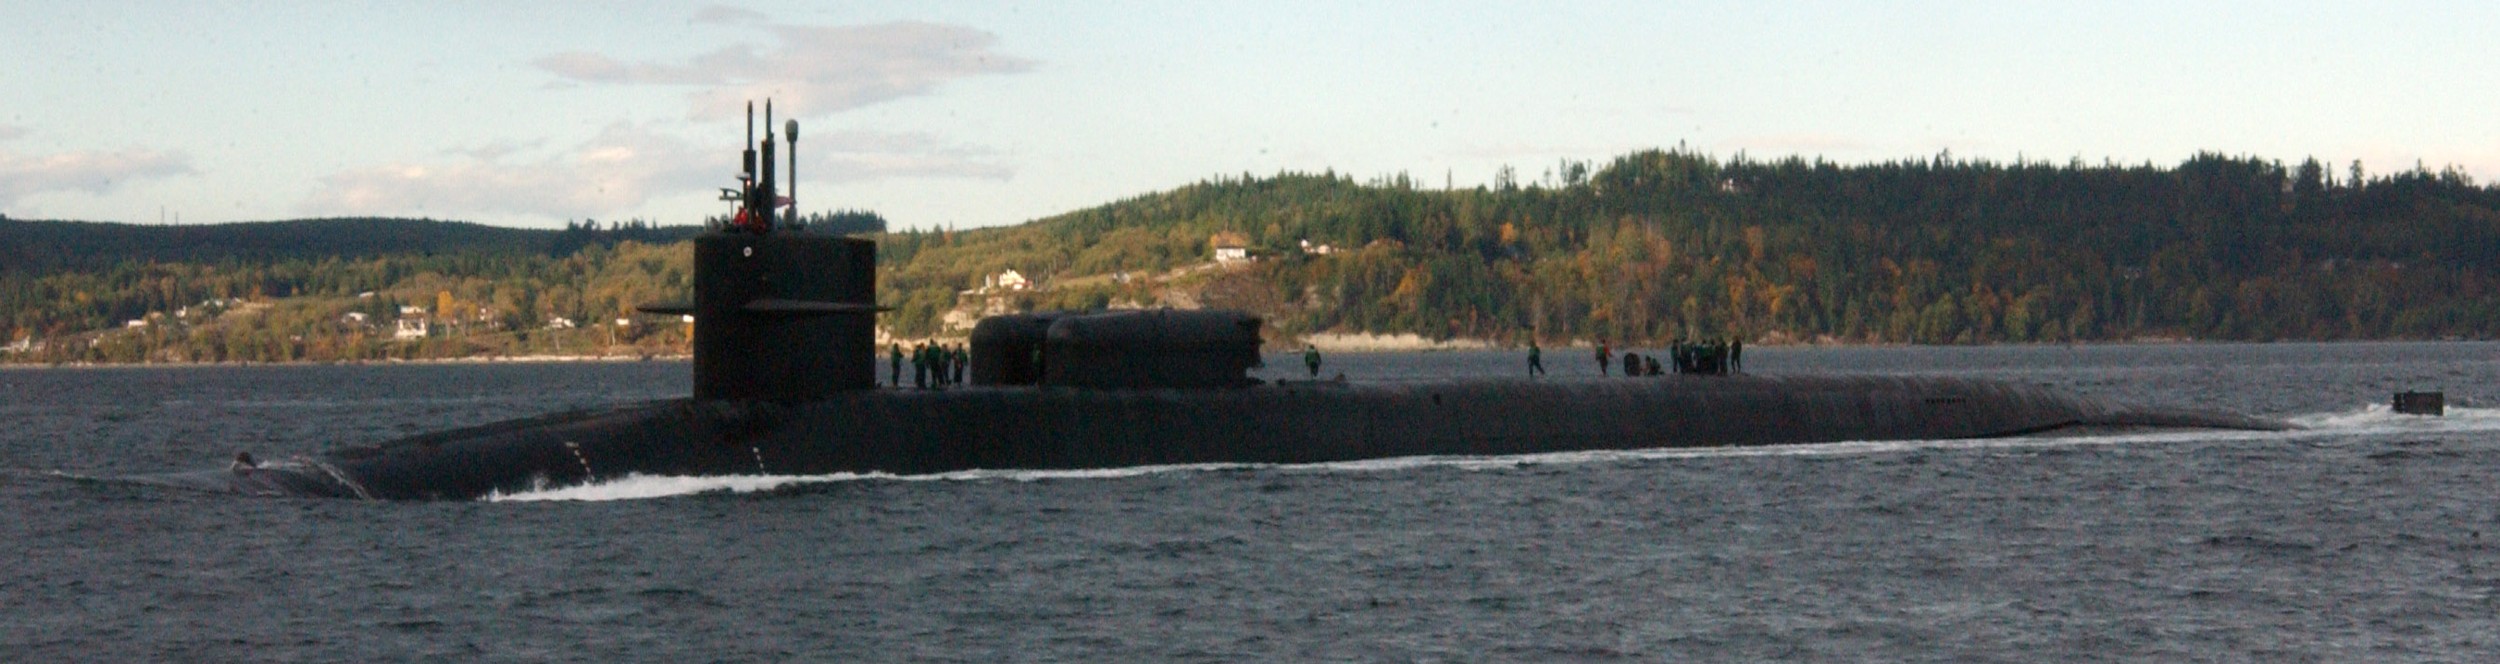 ssgn-726 uss ohio guided missile submarine us navy 2006 48 hood canal